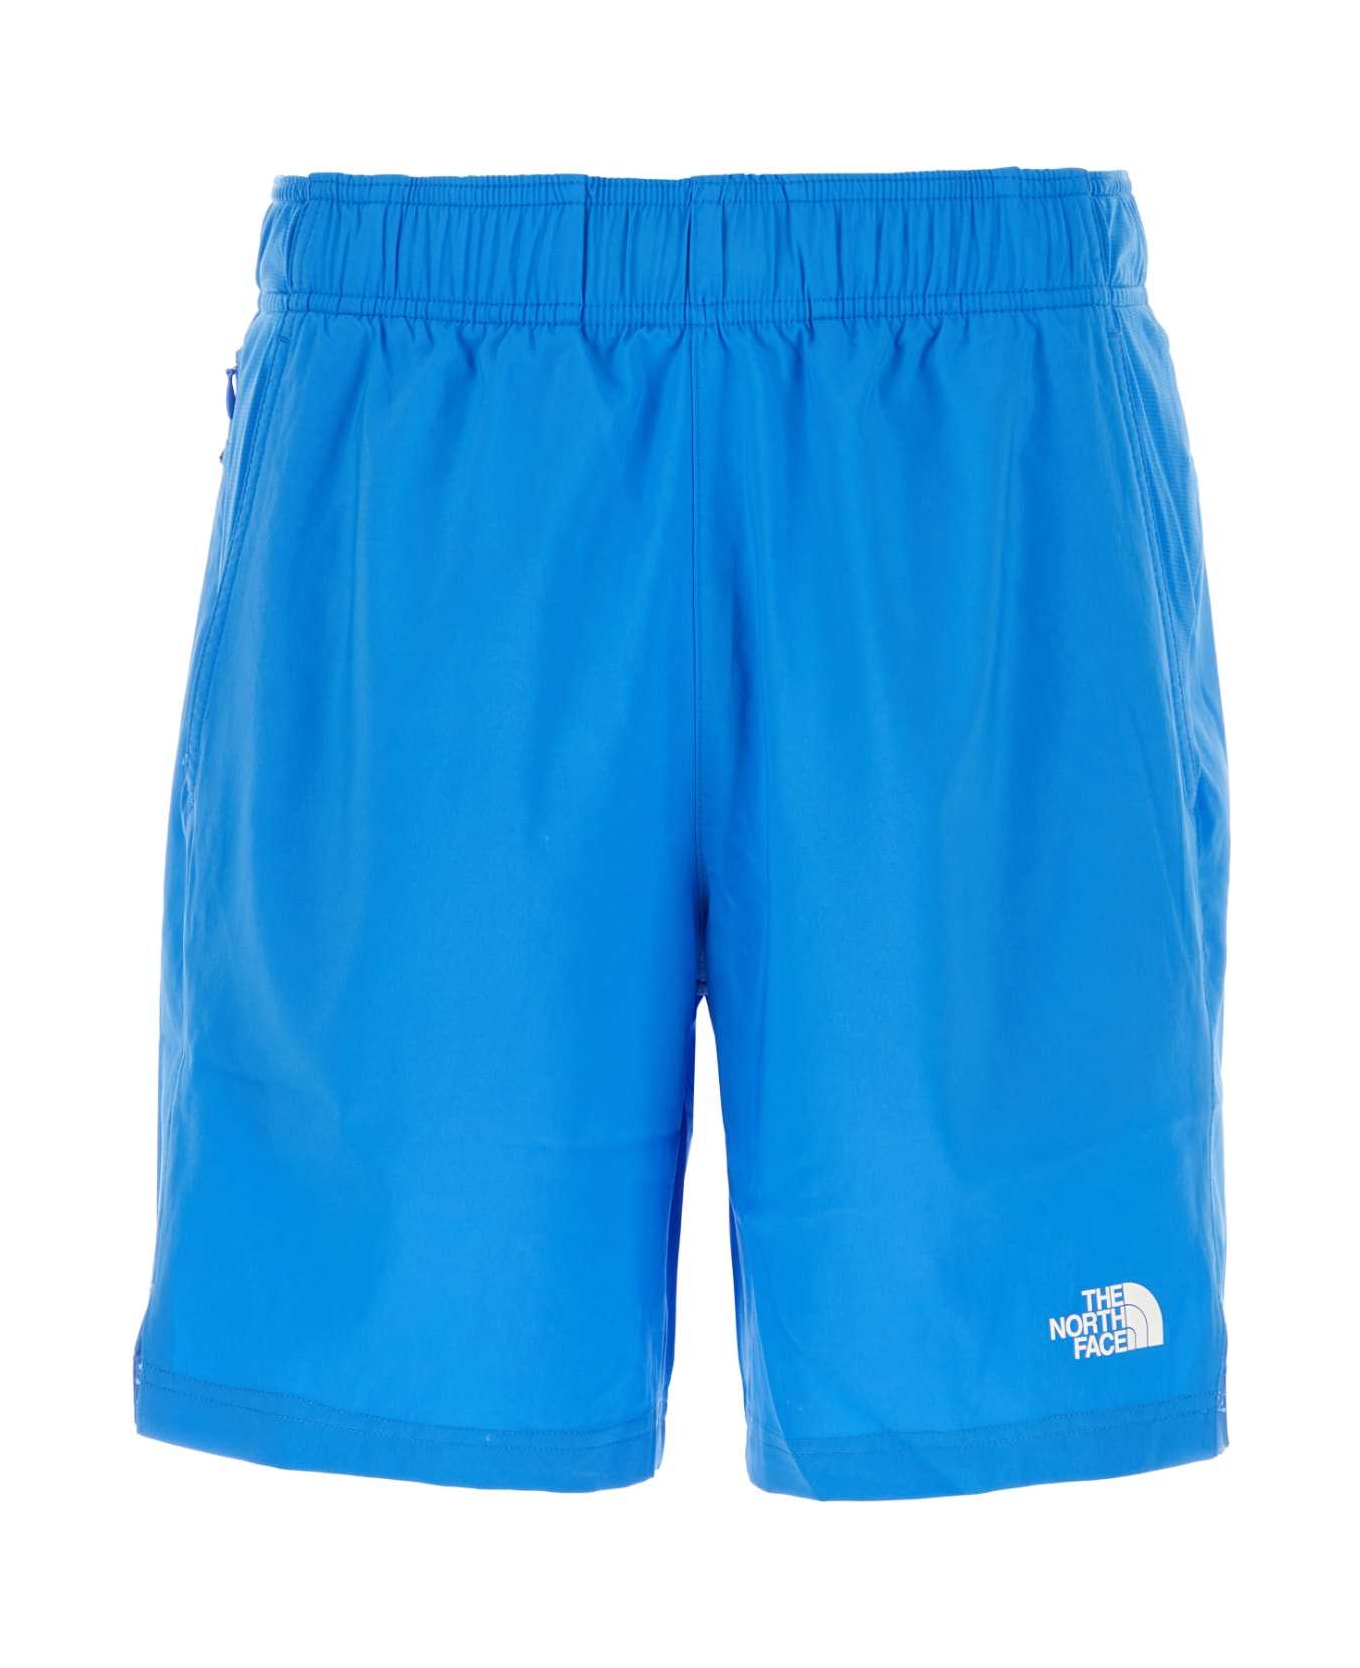 The North Face Turquoise Polyester 24/7 Bermuda Shorts - LIGHTBLUE